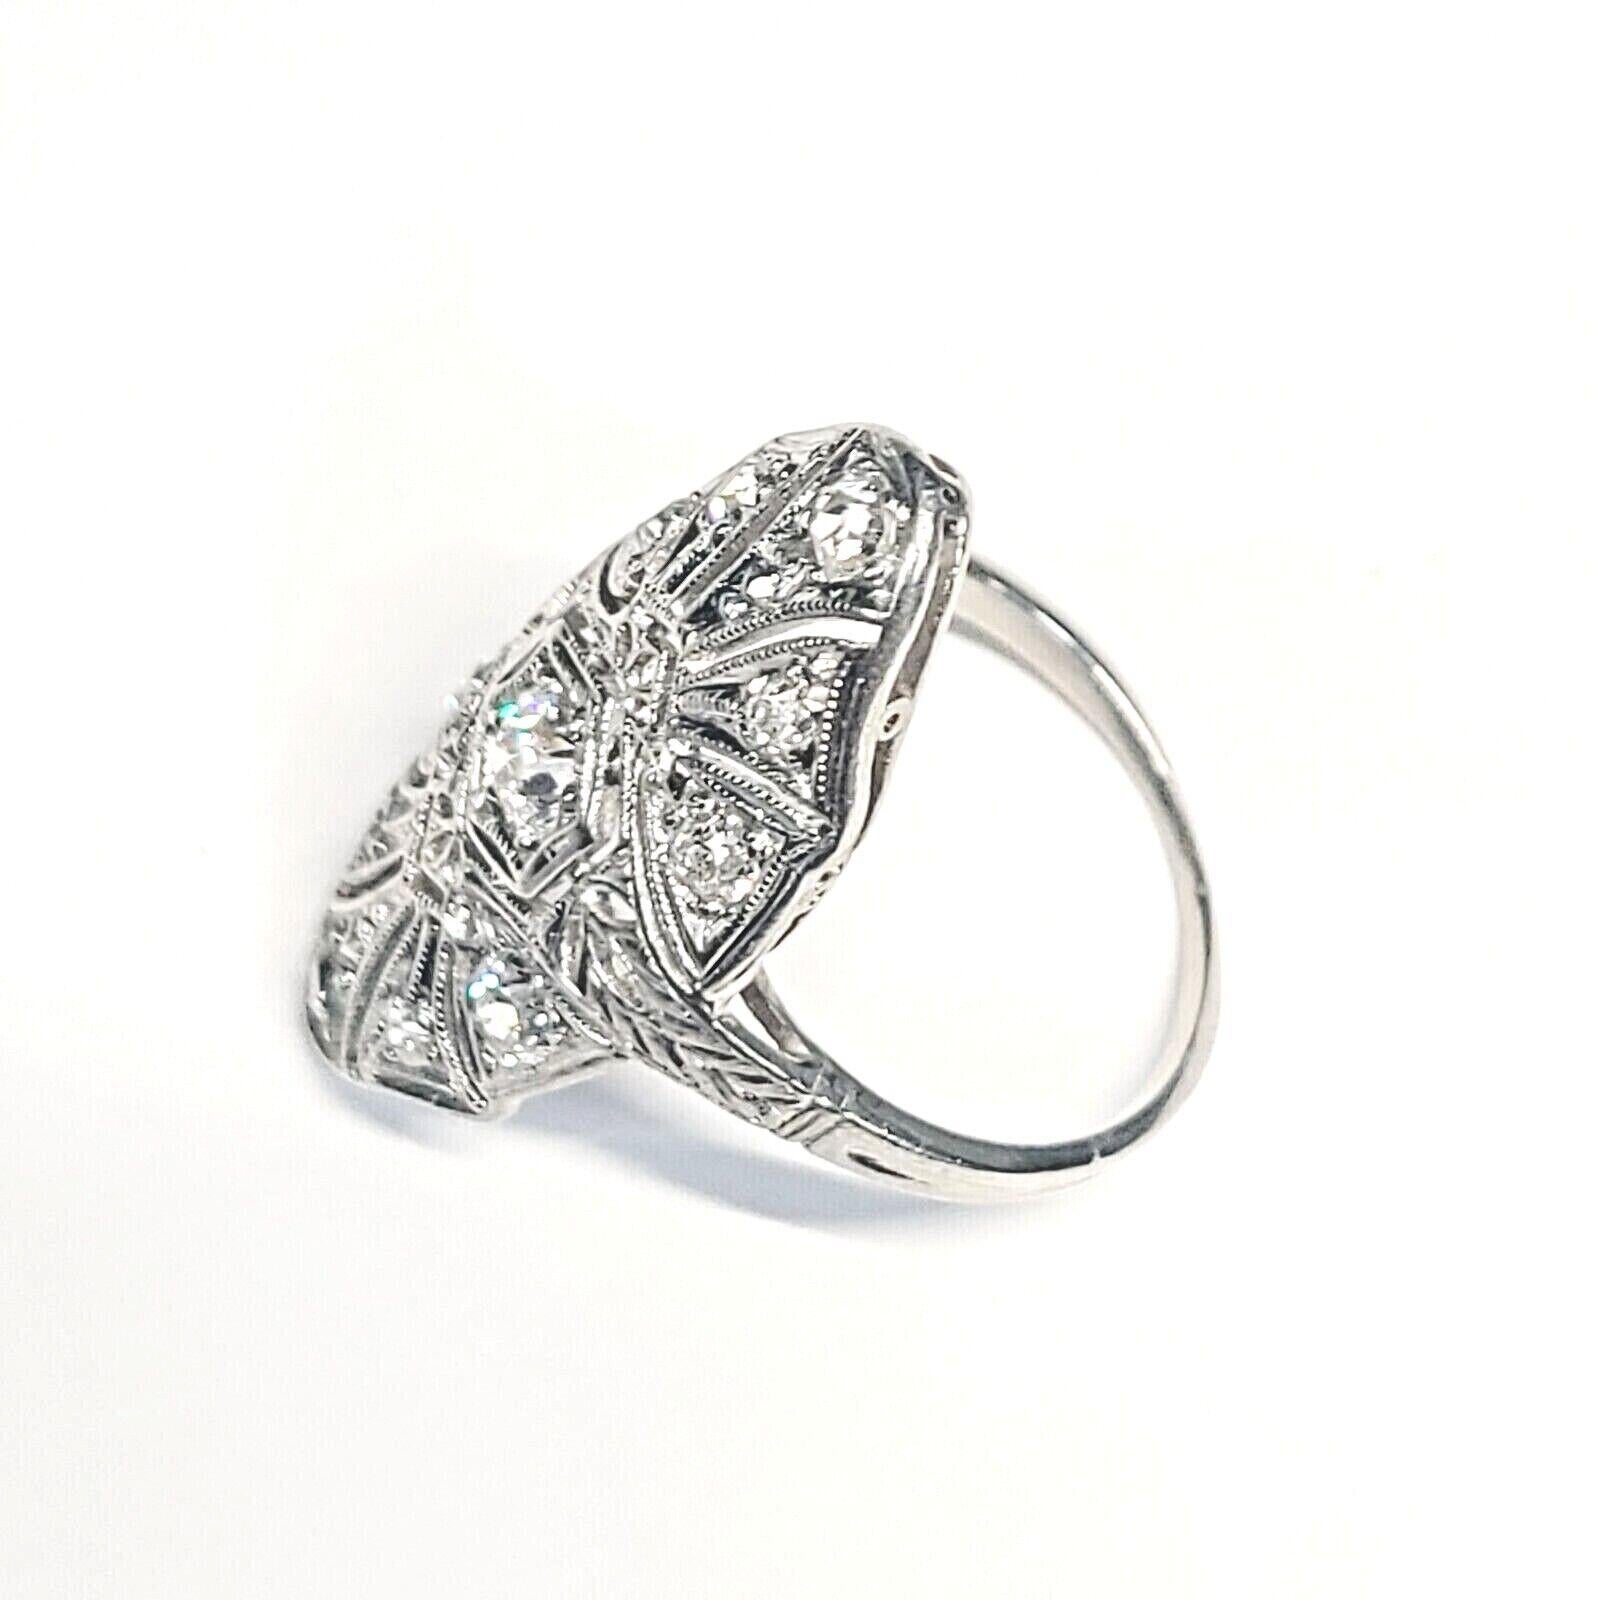 Presenting a:

Antique Platinum Navette 1ctw Diamond Ring Size 4.75.

The ring is made is solid platinum Navette style with filigree design.

Pave set with sparkling lustrous old mine cut natural diamonds.

The center diamond is approximately .25ct